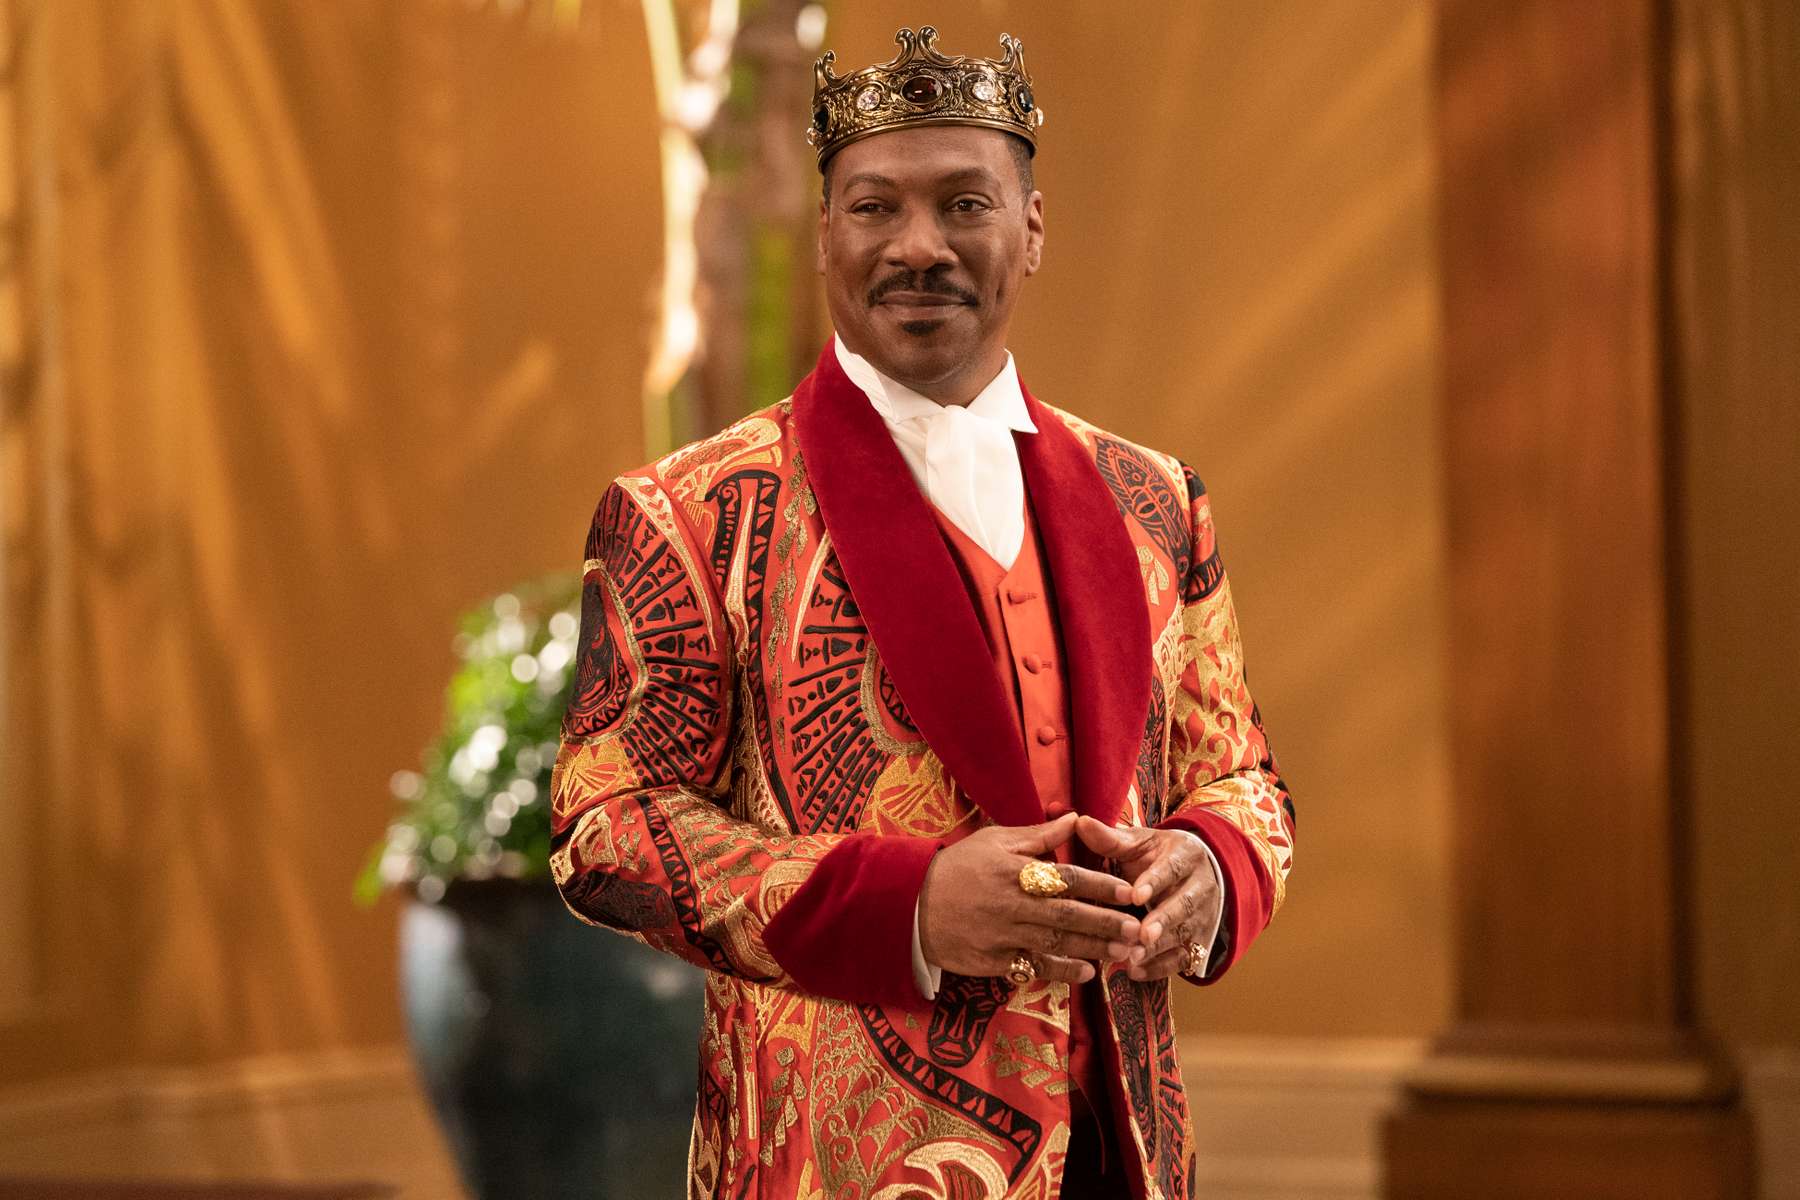 Eddie Murphy stars in COMING 2 AMERICA Photo: Quantrell D. Colbert© 2020 Paramount Pictures